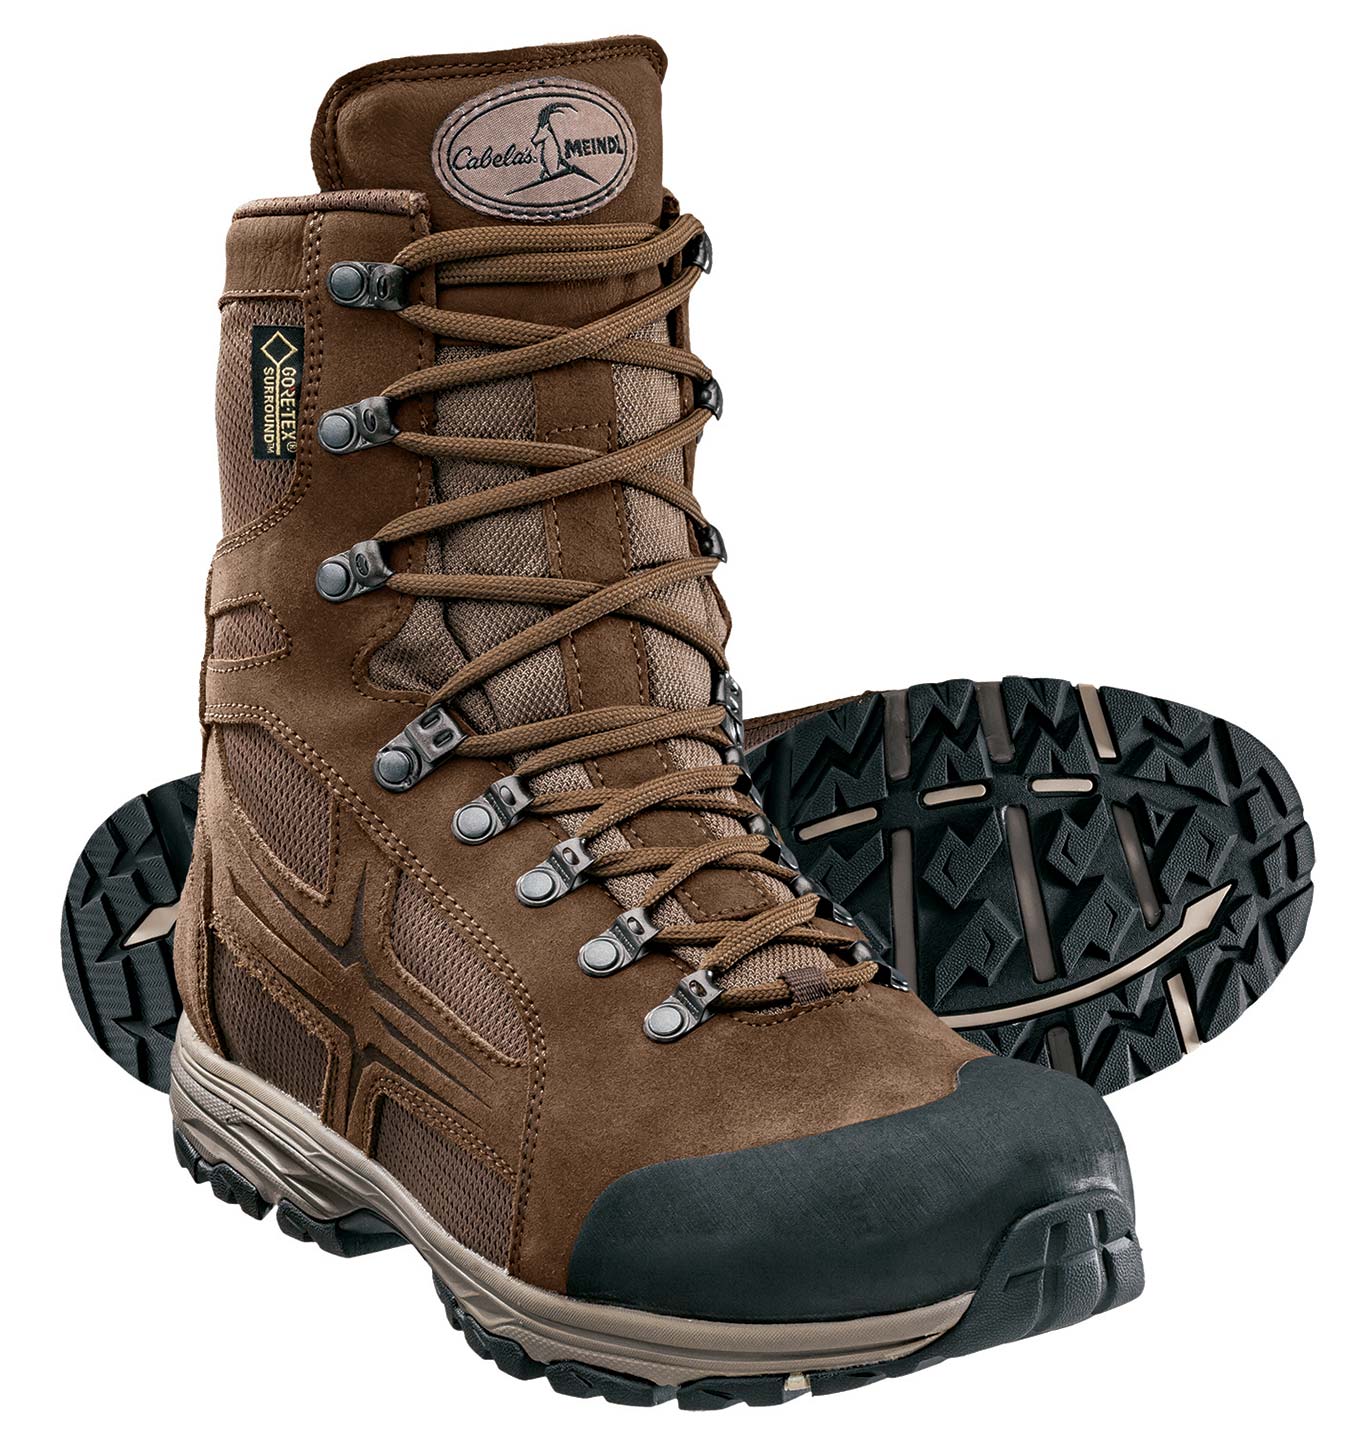 Cabela's Meindl GORE-TEX Surround Hunting Boots FDGG